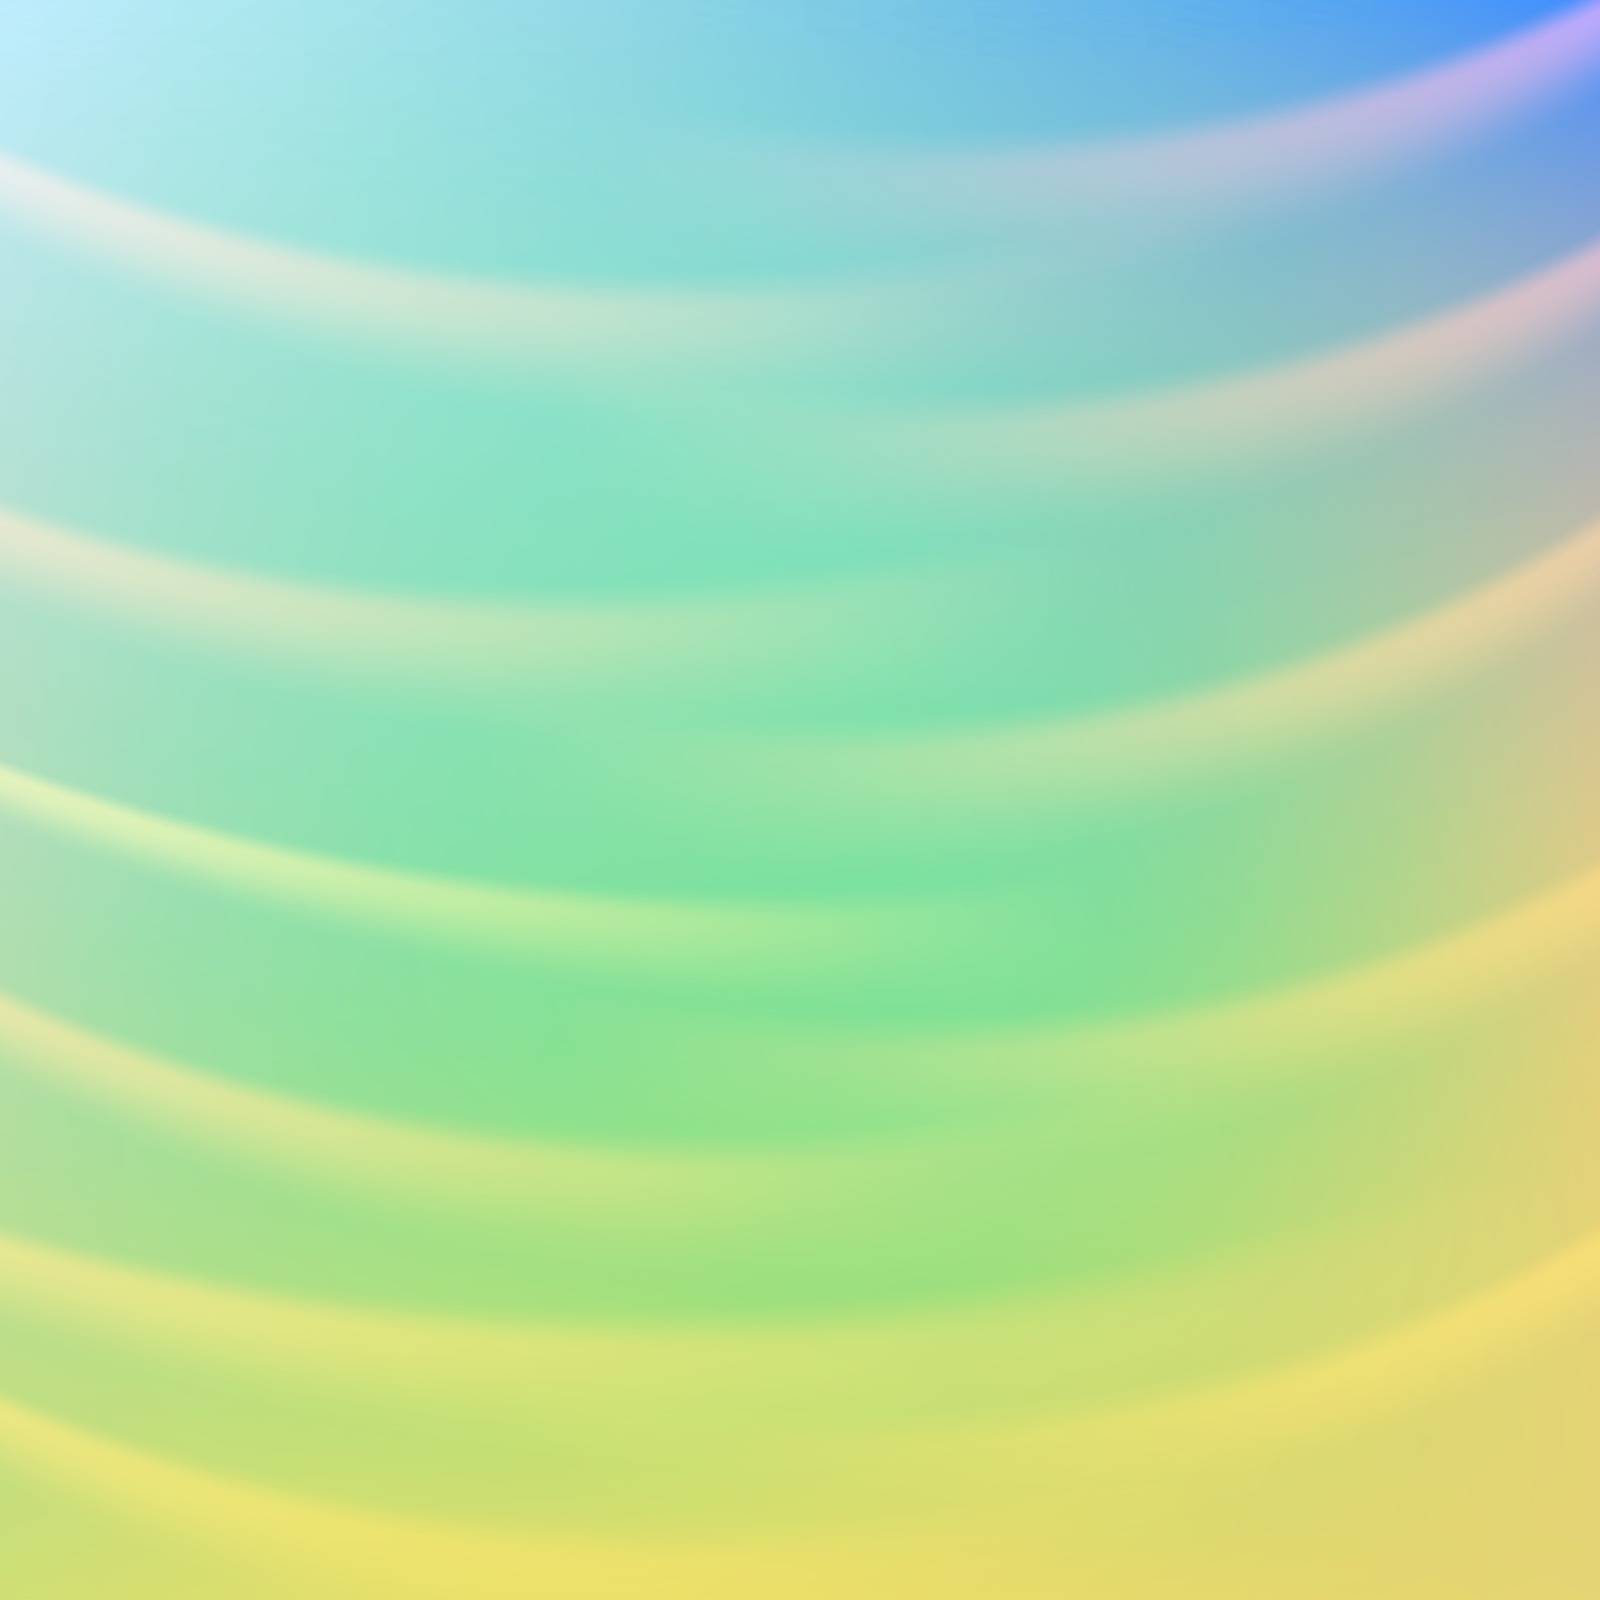 Abstract Colorful Blurred Background. Abstract Blurred Pattern